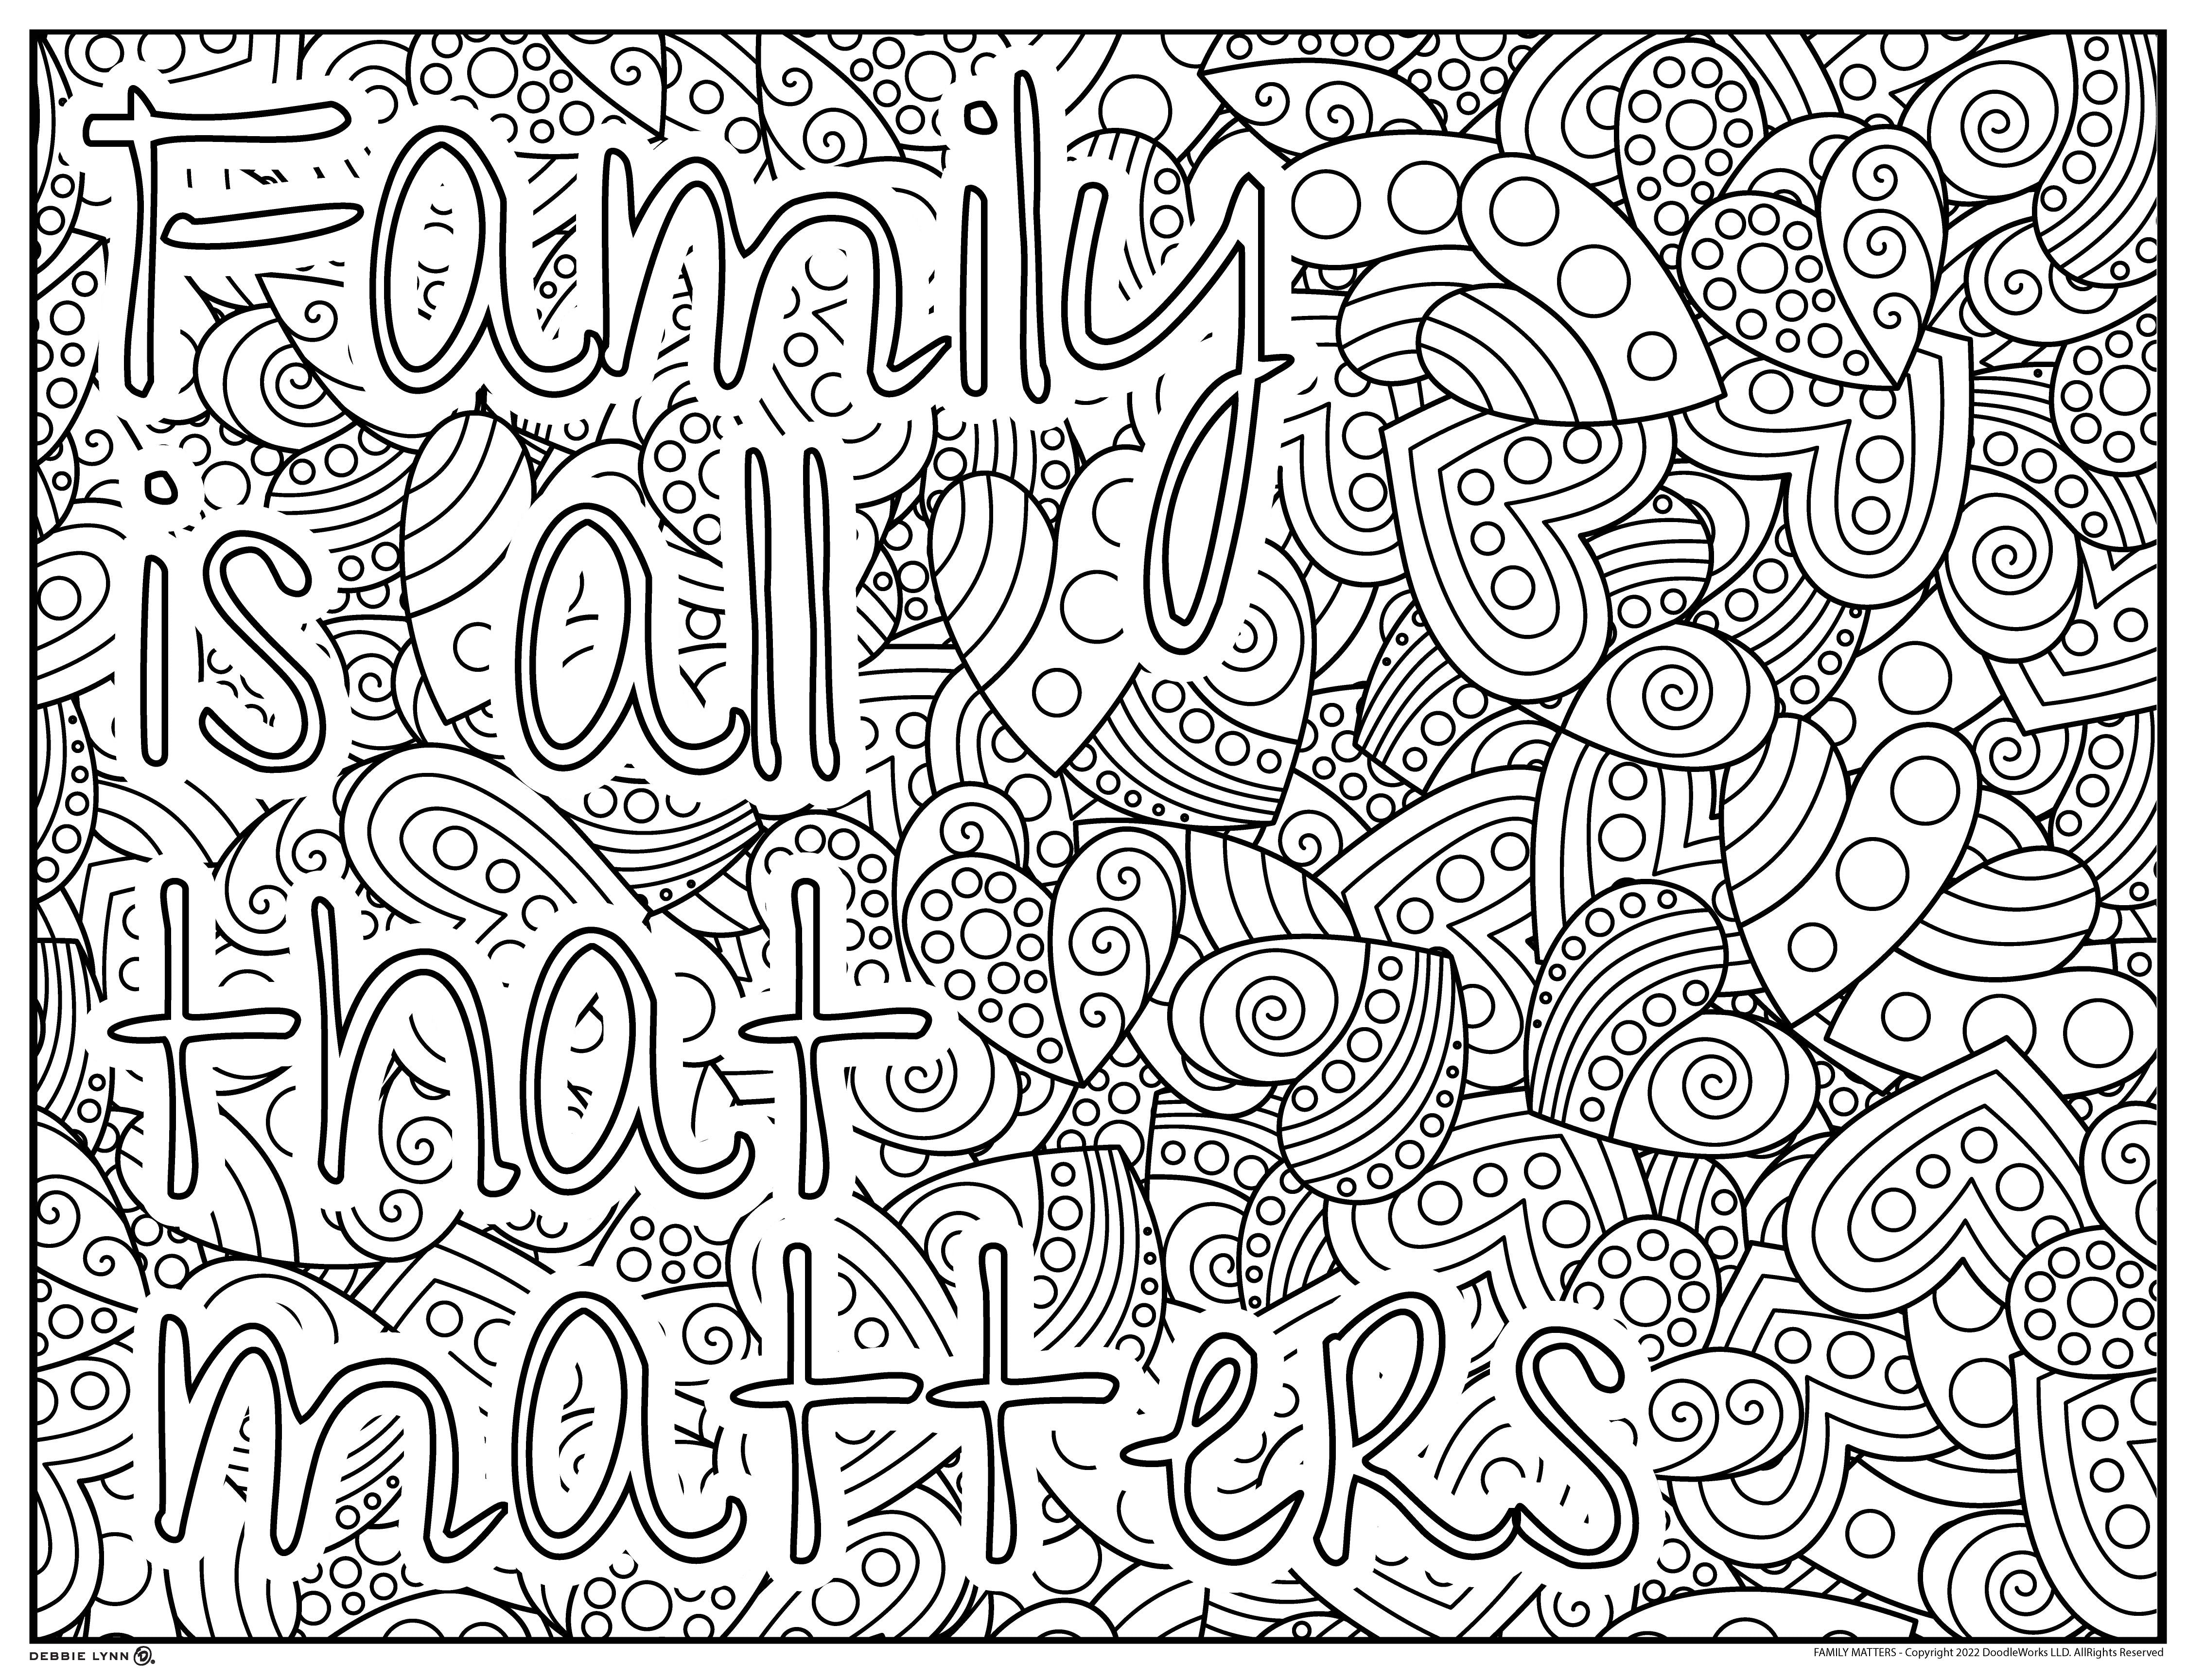 You Matter Personalized Giant Coloring Poster 48x63